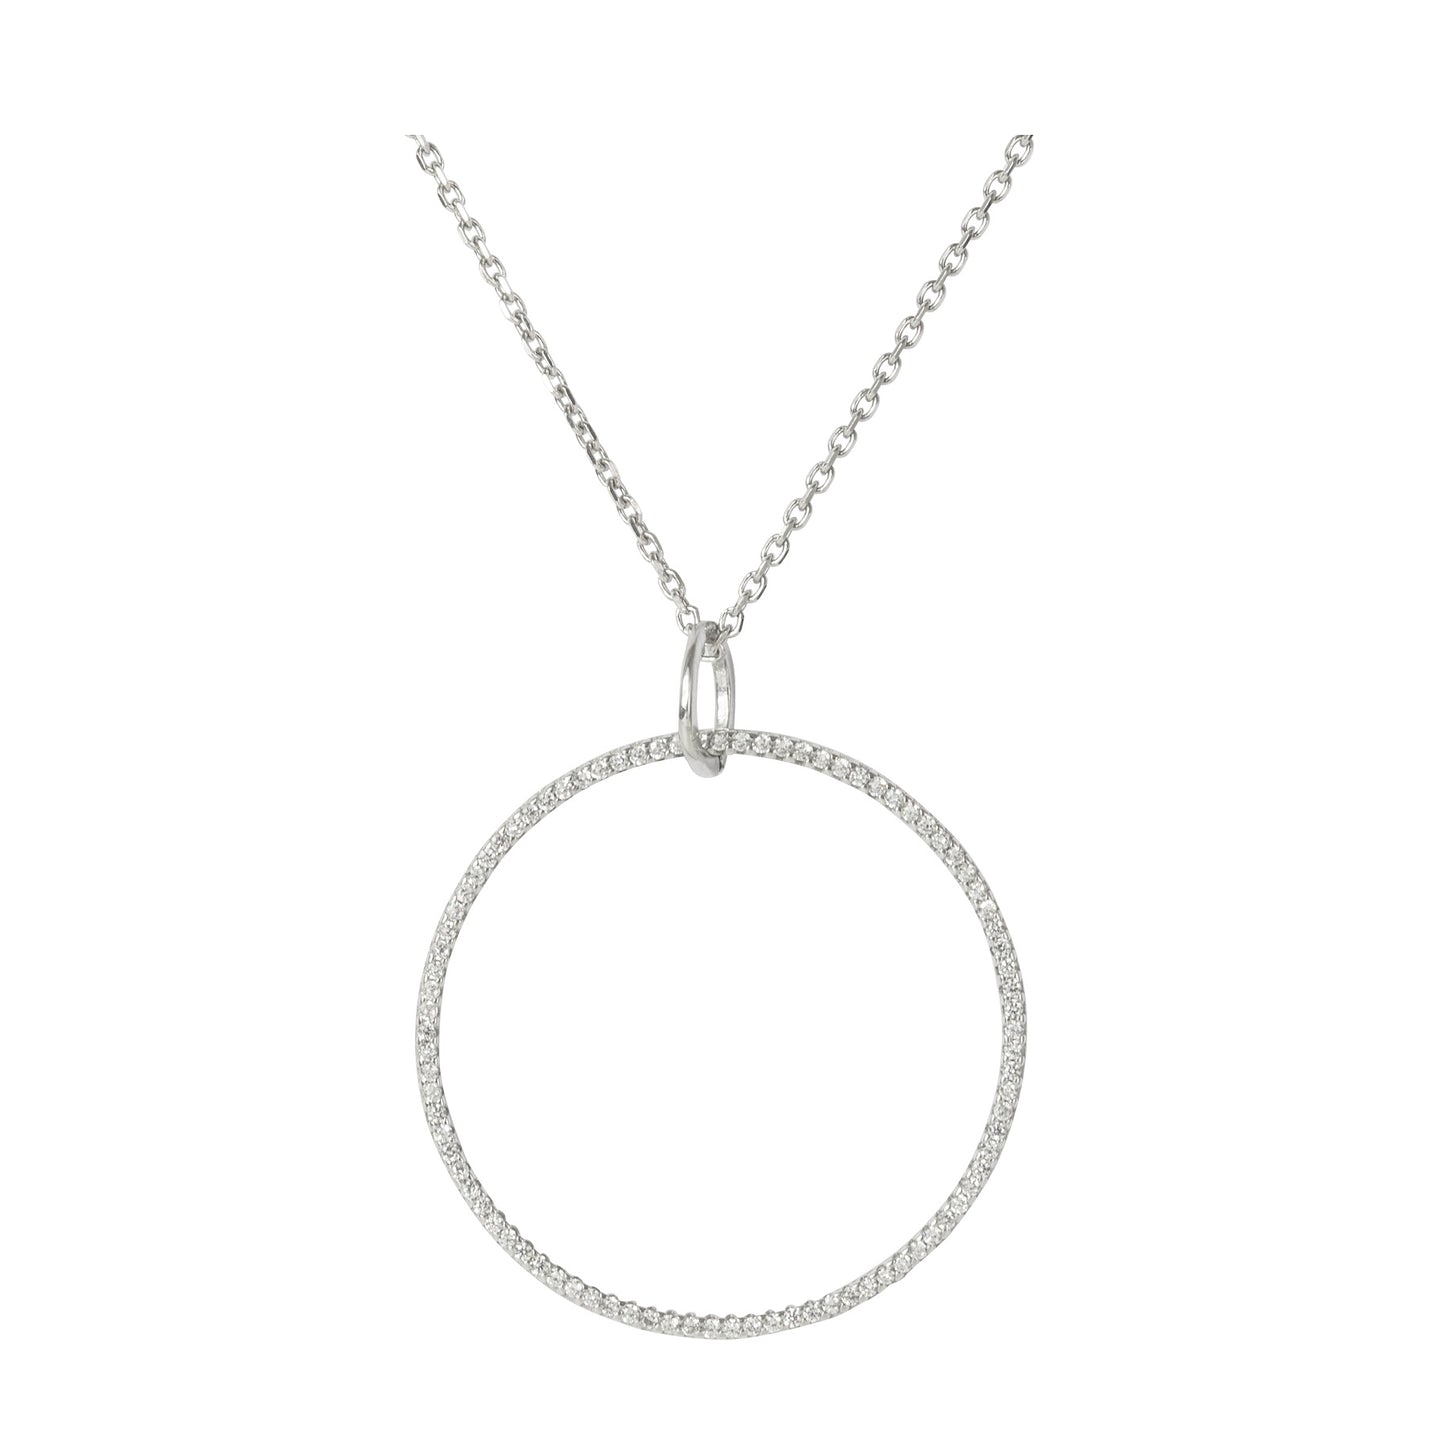 60cm Long Necklace With Large Clear Crystal Circle (Circle diam 32mm)